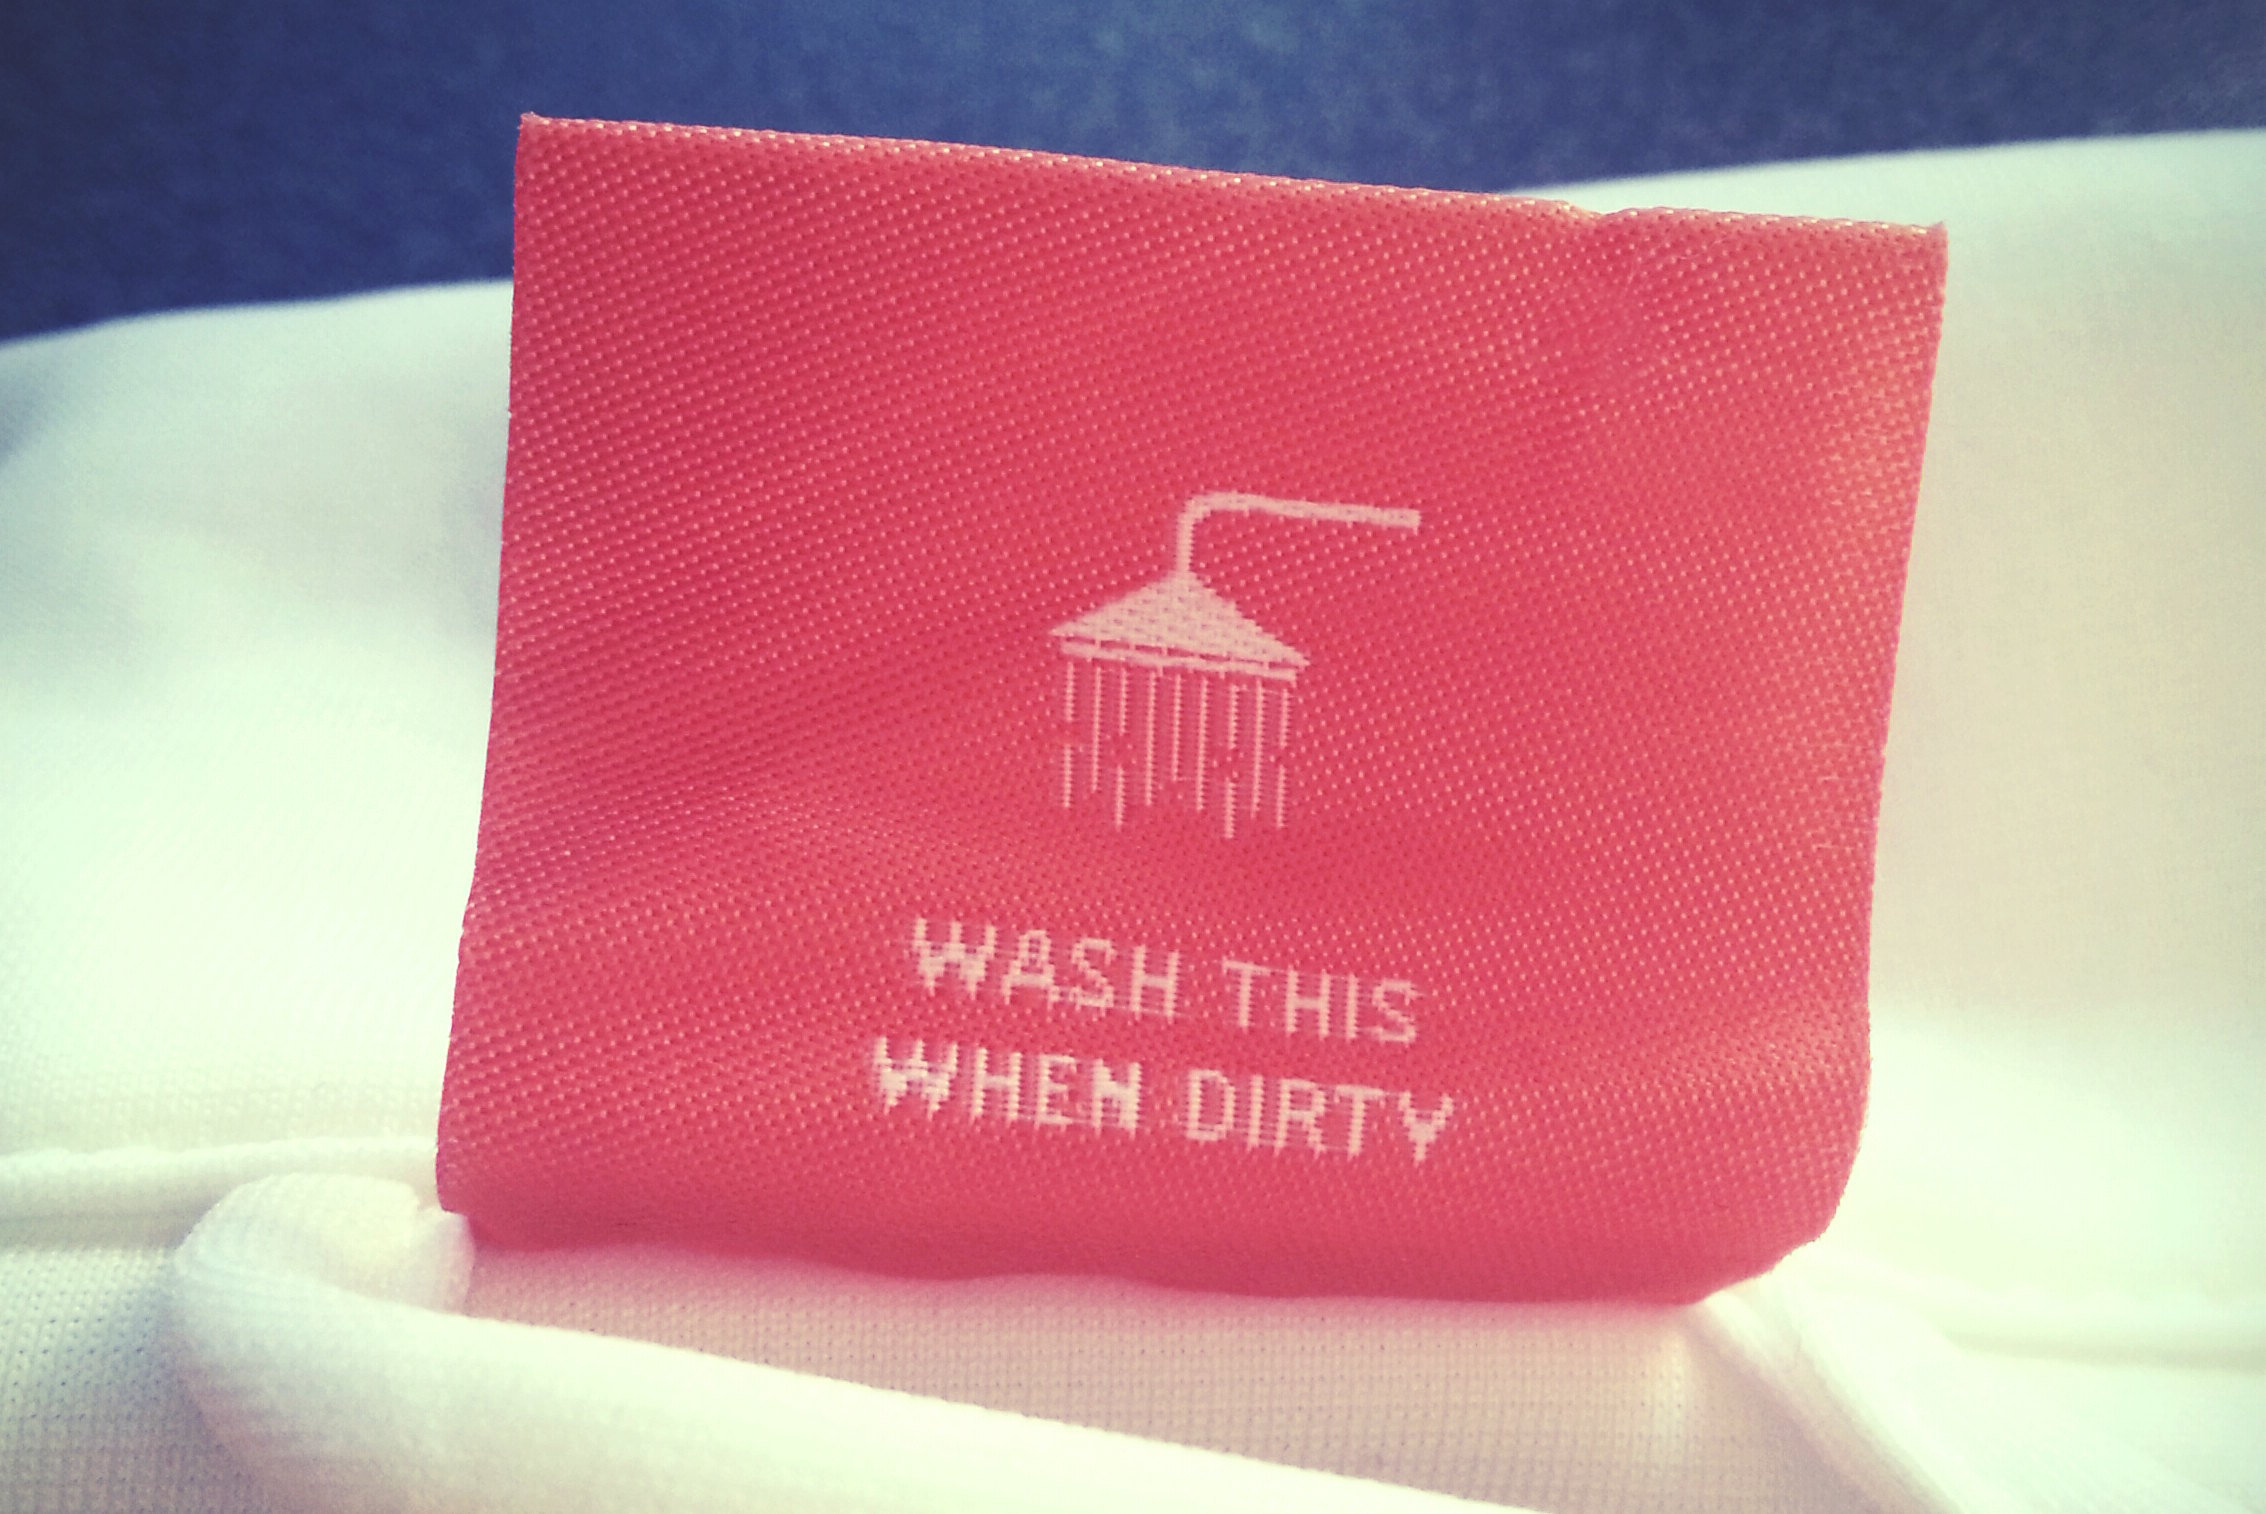 Simple washing instruction - wash this when dirty